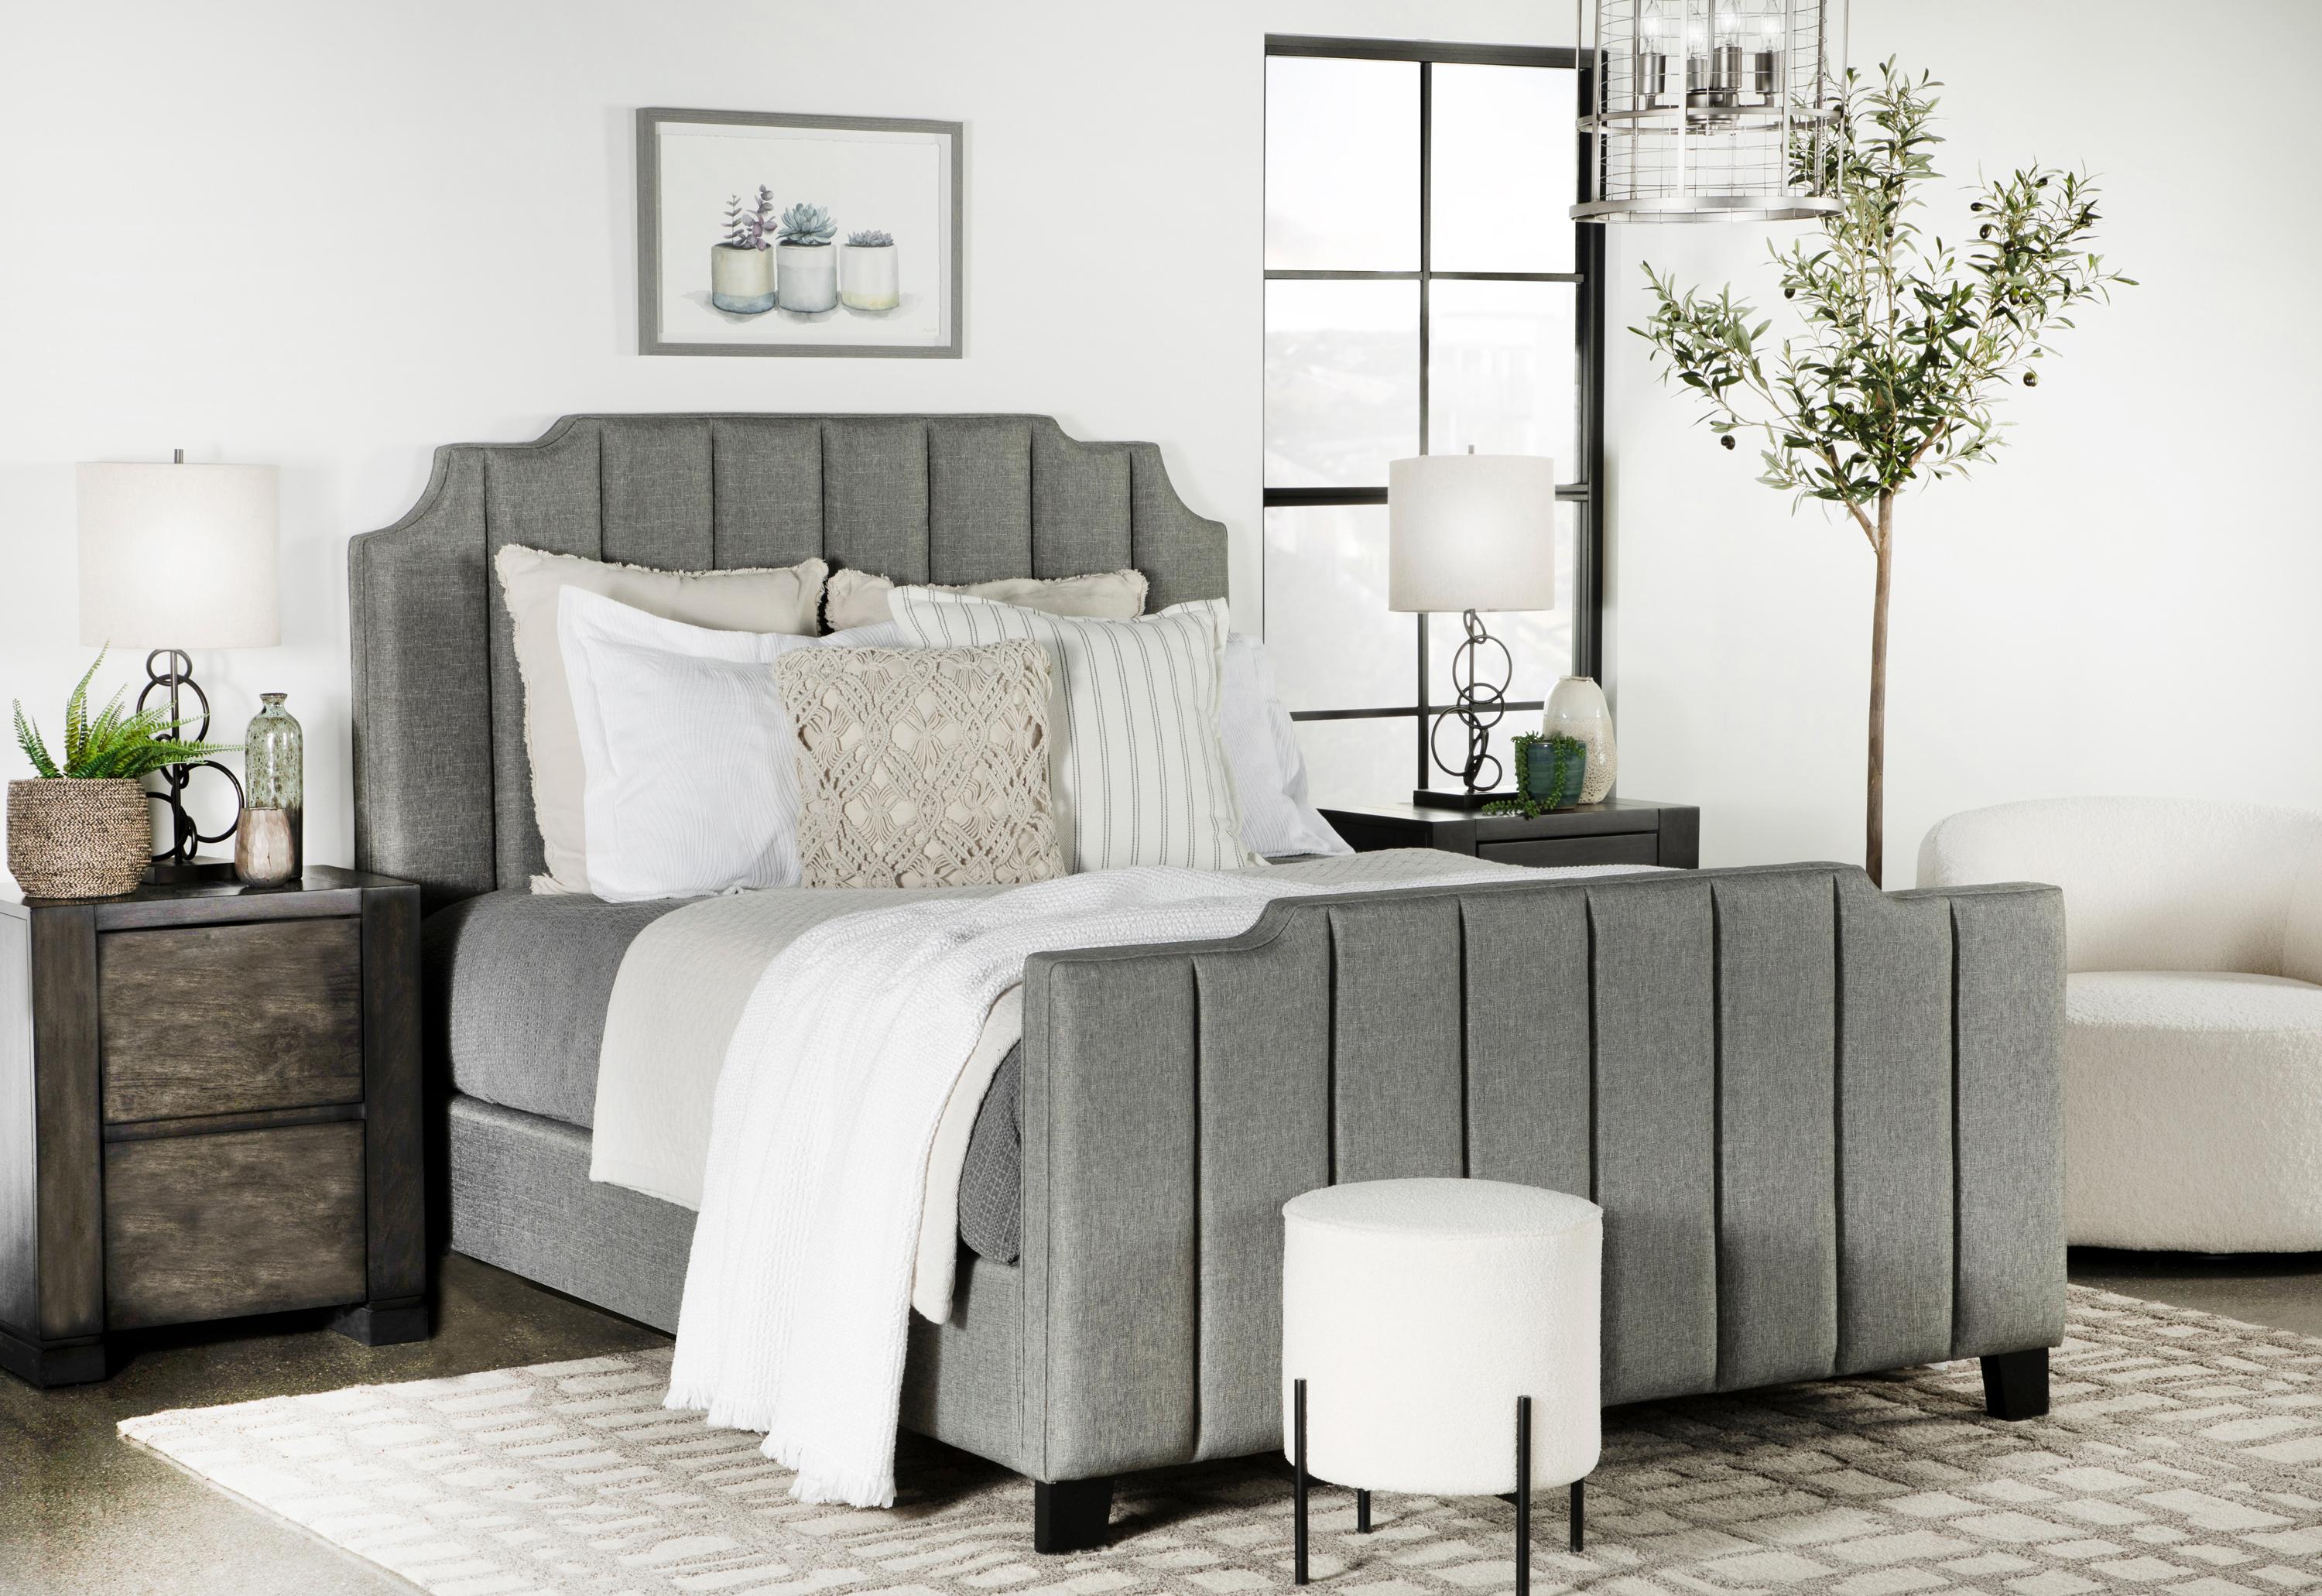 

    
306029Q Contemporary Light Gray Fabric Upholstery Queen Bed Coaster 306029Q Fiona
